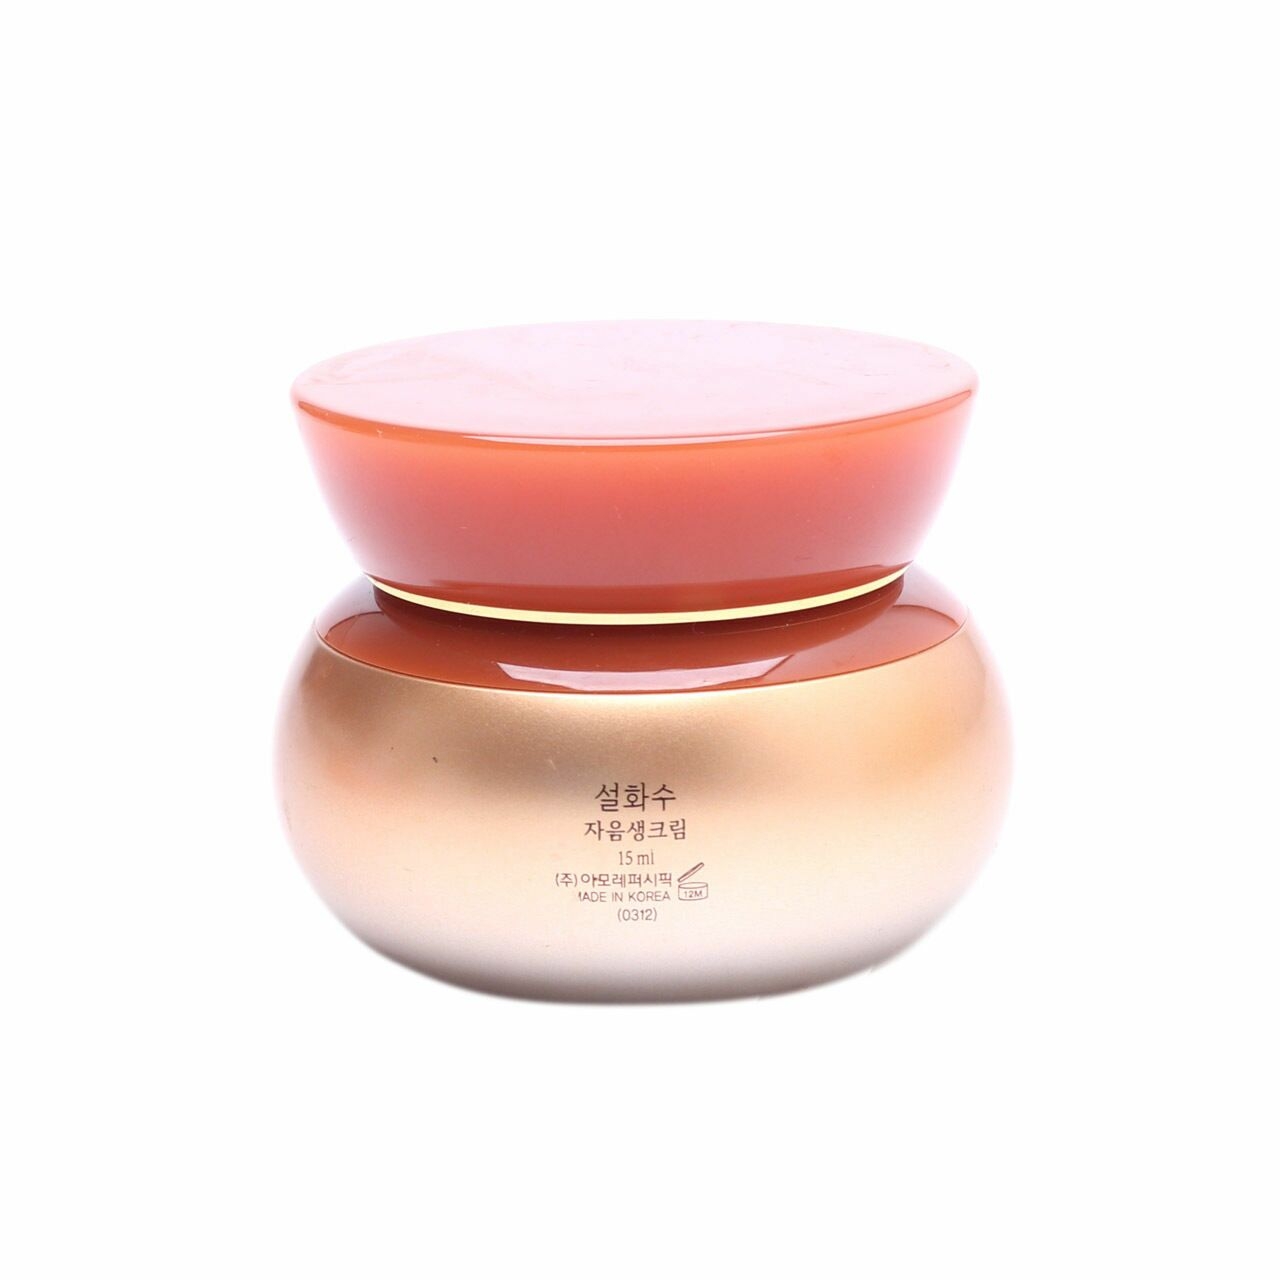 Sulwhasoo Concentrated Ginseng Renewing Cream Ex Skin Care